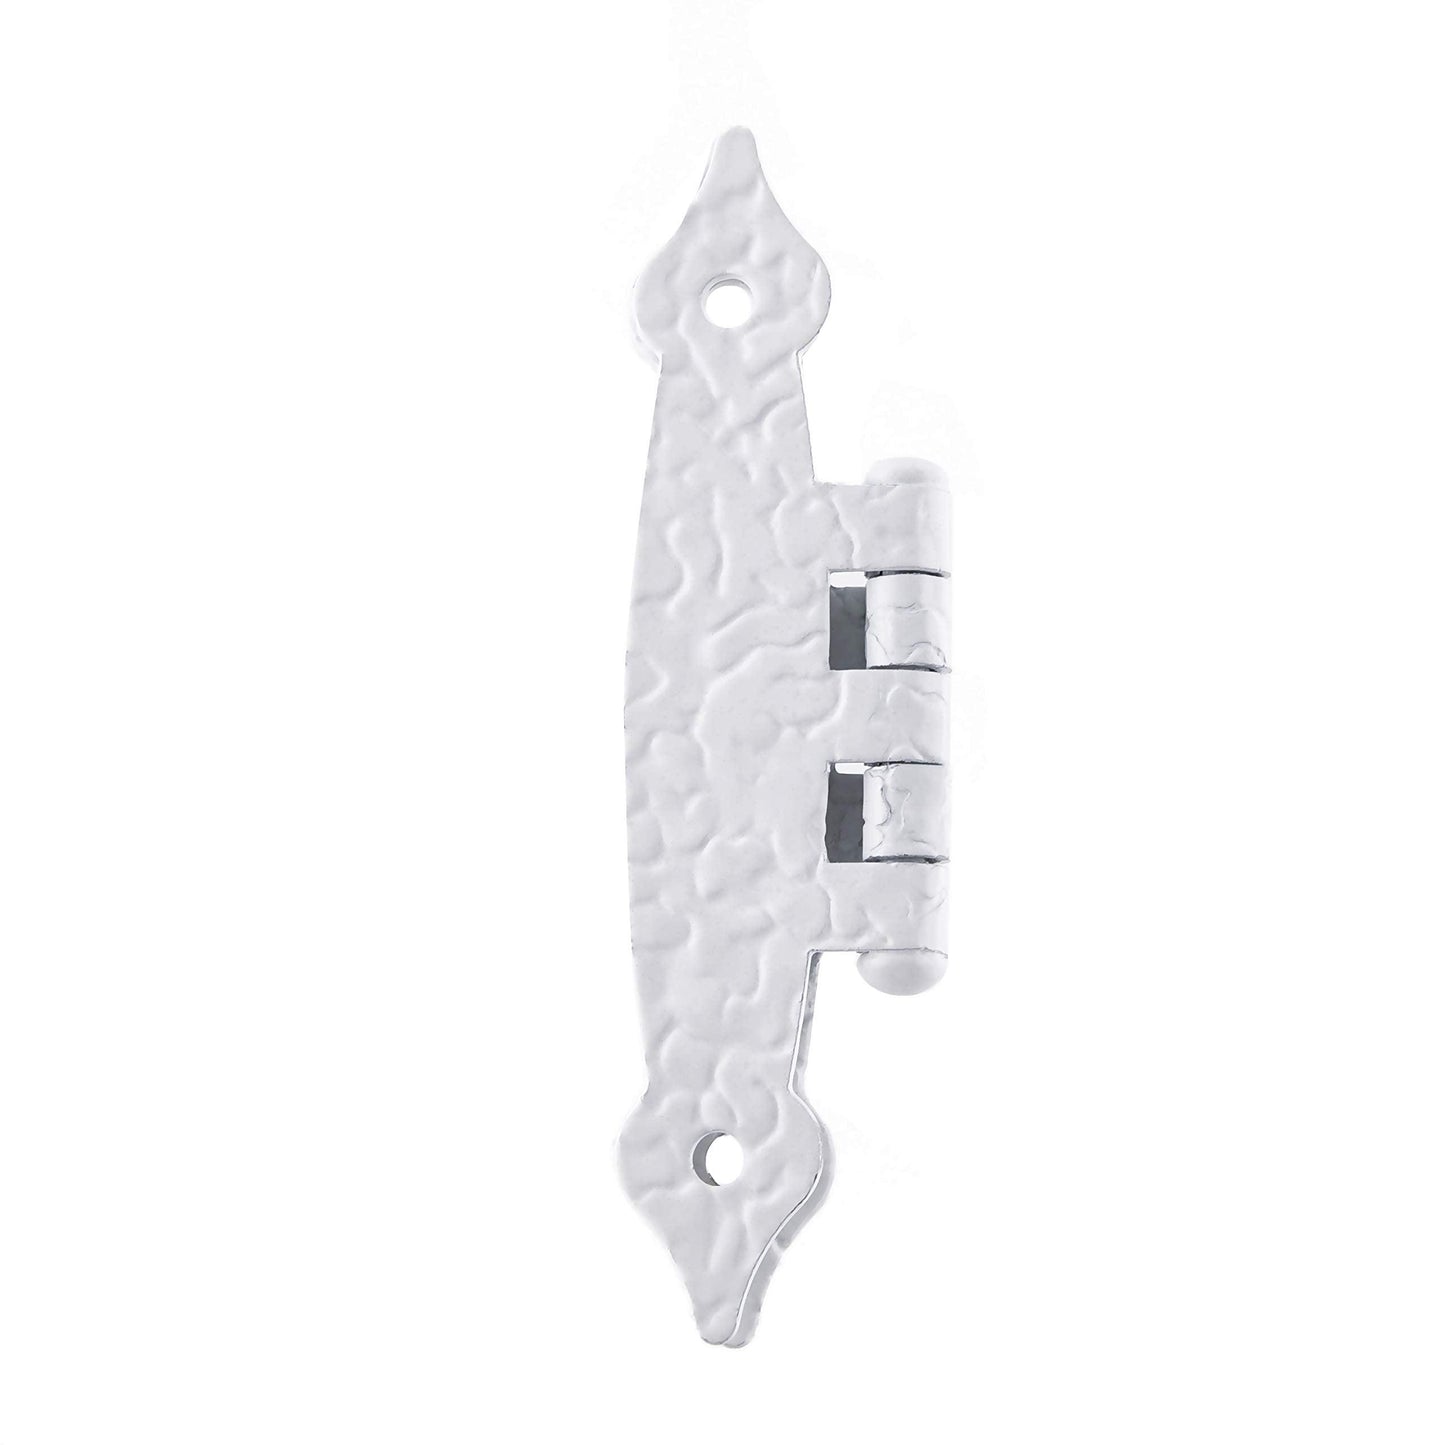 TamBee 10Pcs Cabinet Hinges White H Hinges Antique Decorative Cabinet Door Hinges Cupboard Hinges Small Hinges Mini Hinges Box Hinges Flat Hinges 3.42x1.57inch 5 Pairs/10Pcs - TamBee